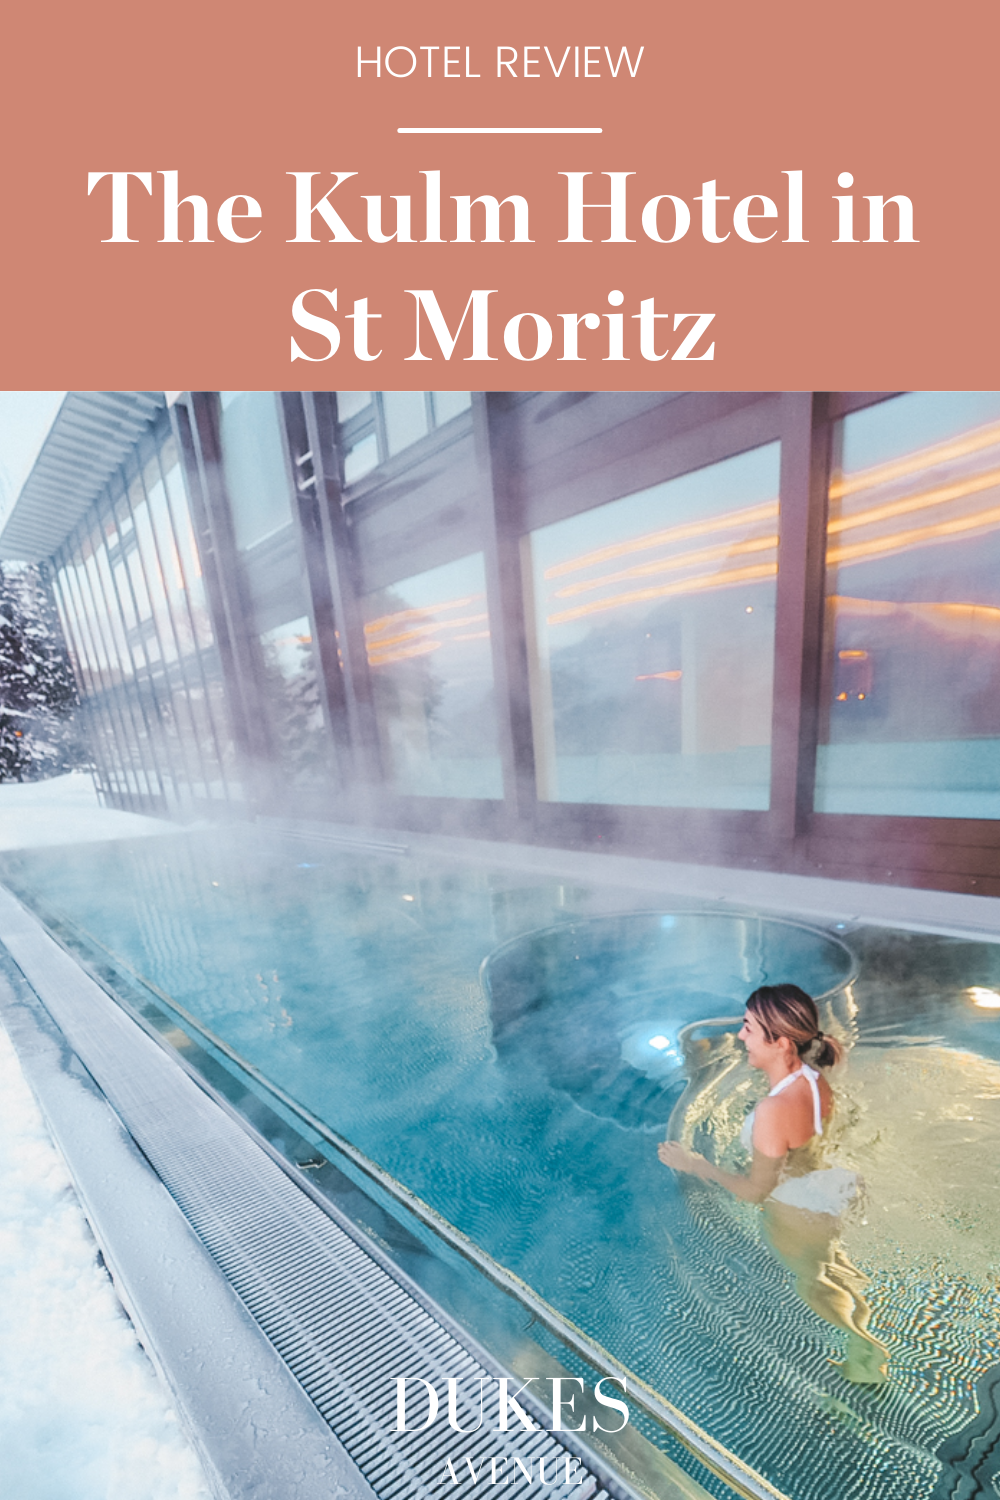 Woman swimming in an outdoor pool with text overlay "Hotel Review - The Kulm Hotel in St Moritz"